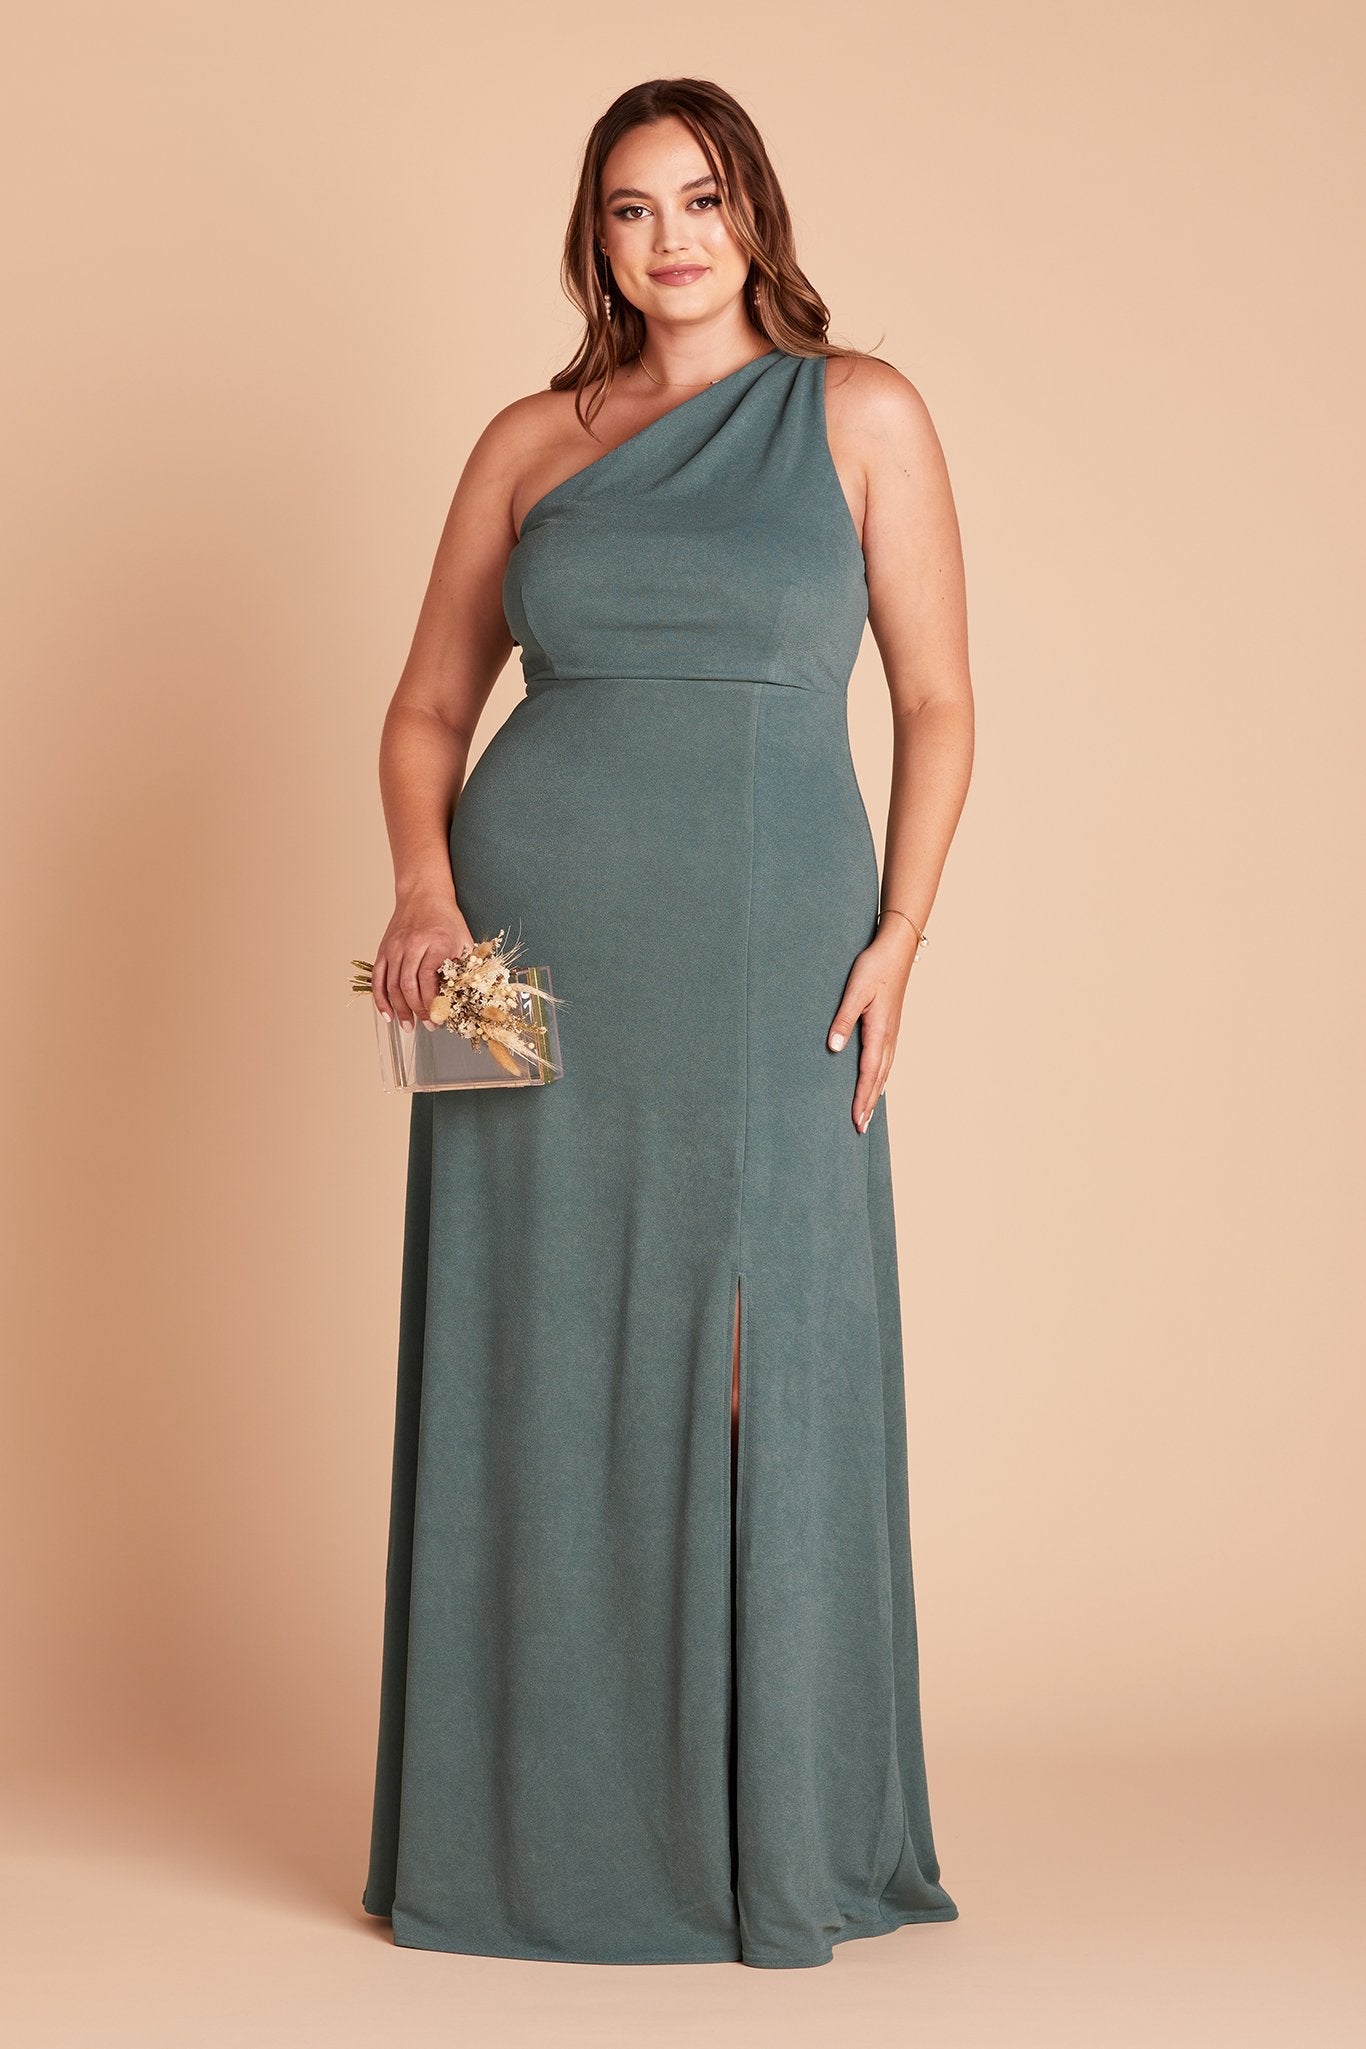 Kira plus size bridesmaid dress with slit in sea glass green crepe by Birdy Grey, front view